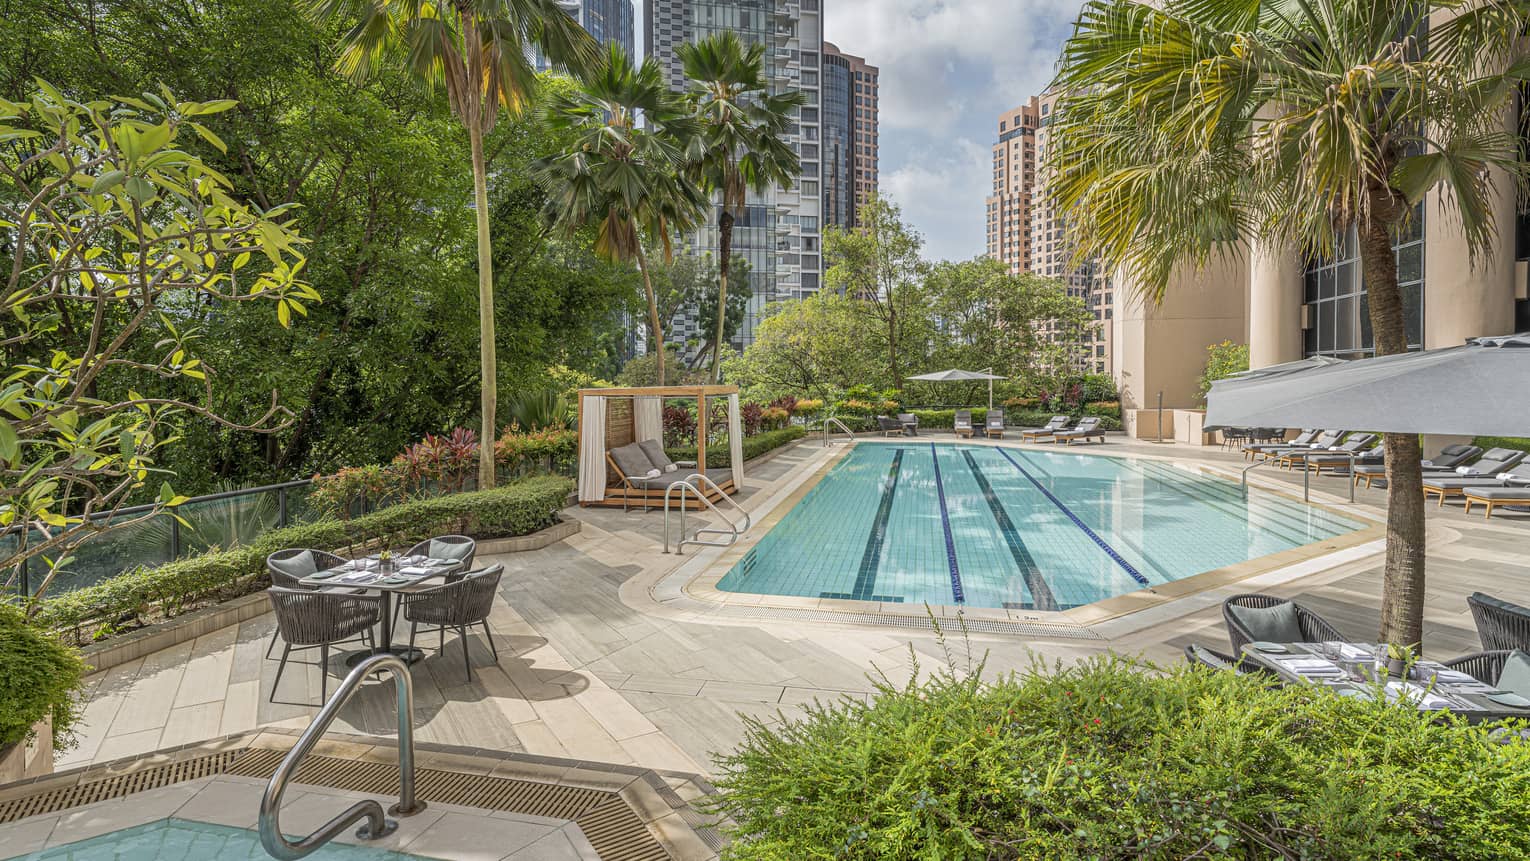 Outdoor lap pool surrounded by palm trees and green foliage, views of downtown Singapore